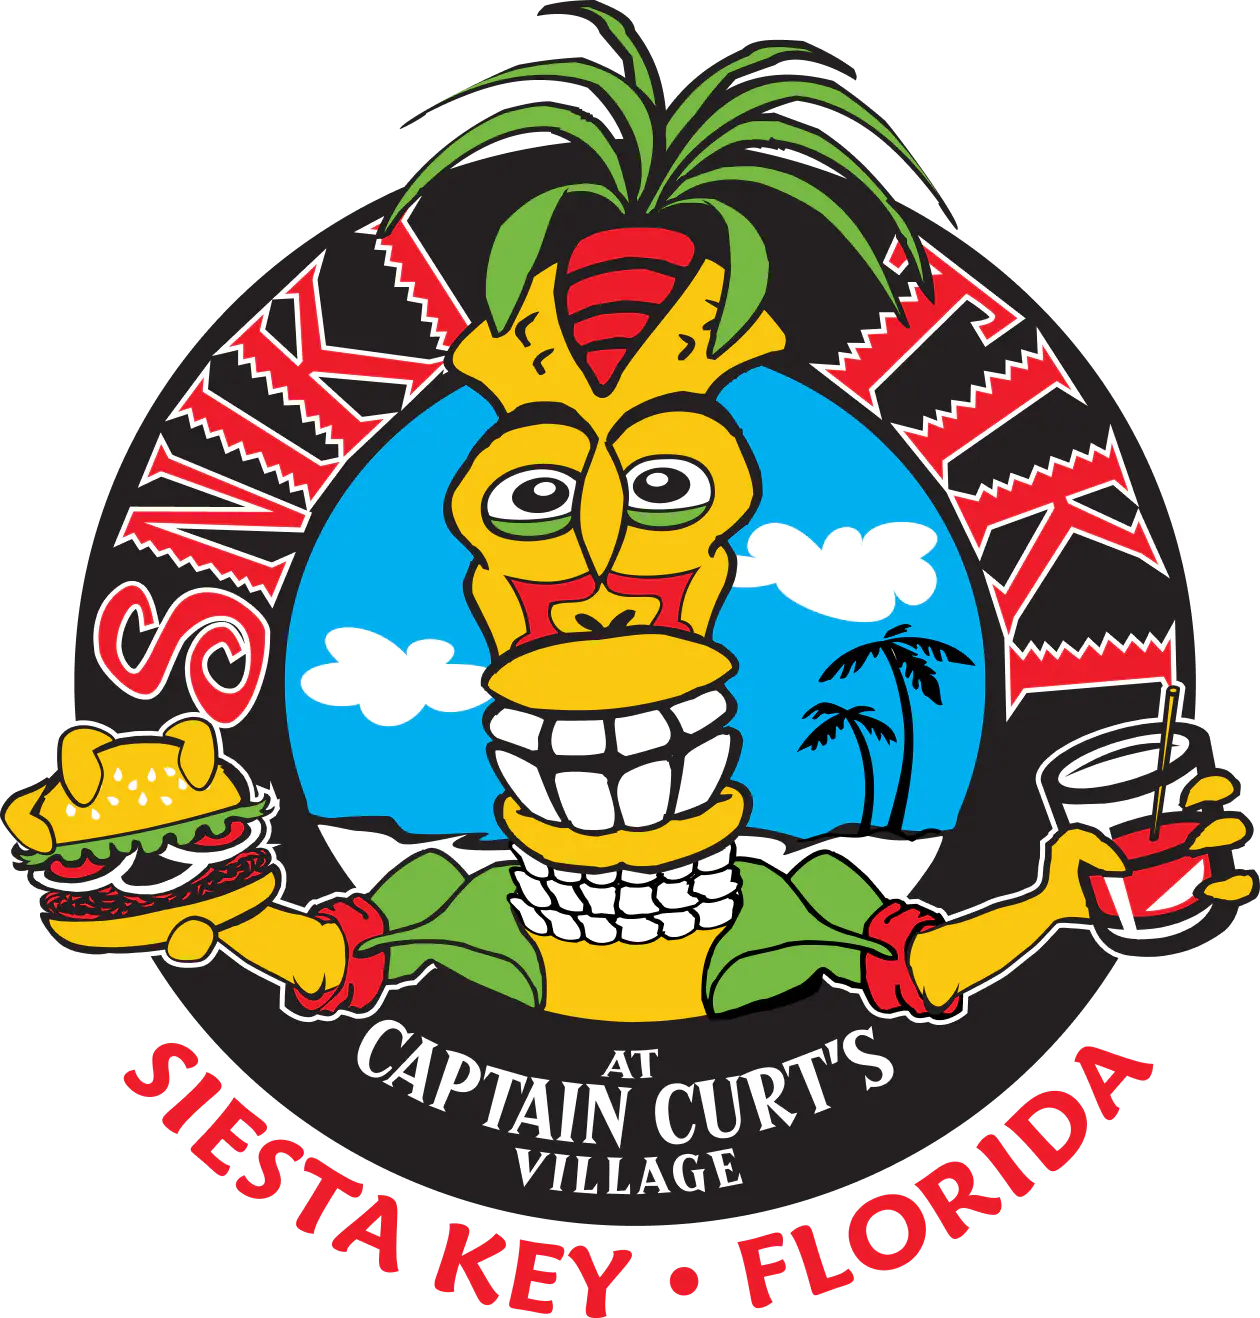 Captain Curt's Crab & Oyster Bar